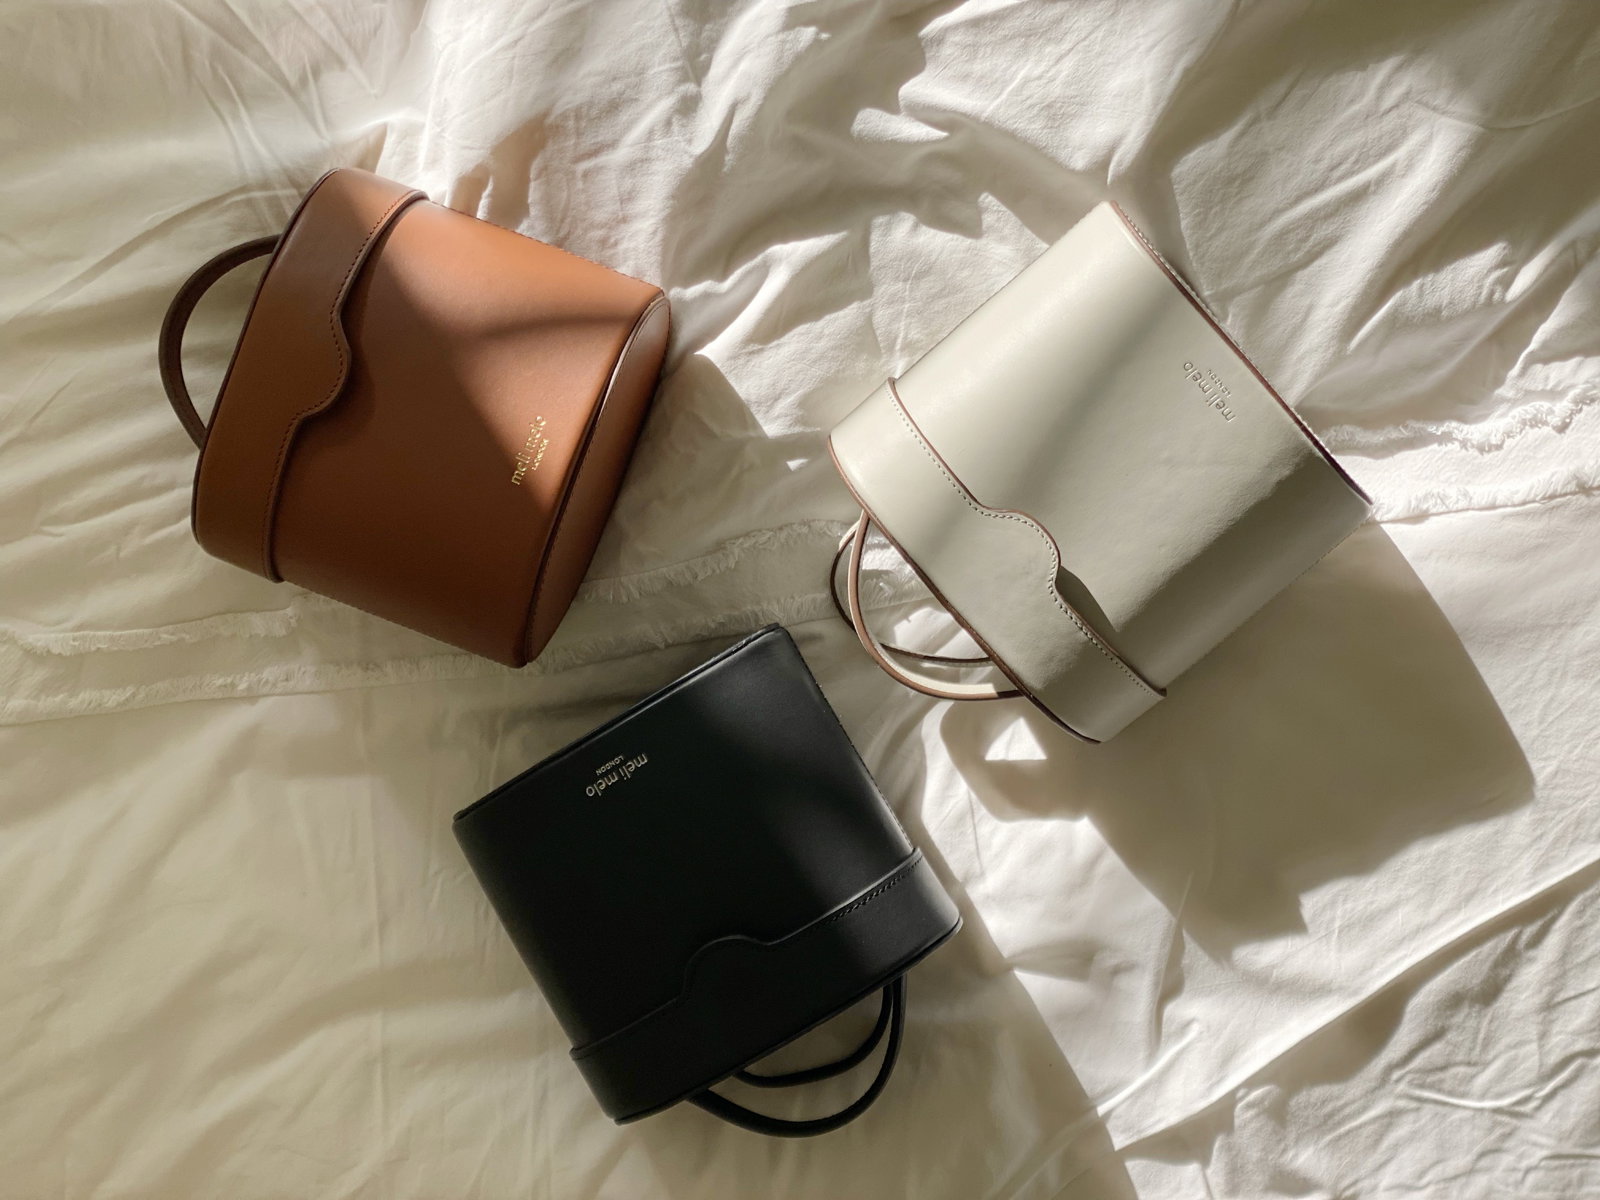 What's In My Bag [MELI MELO Tote]